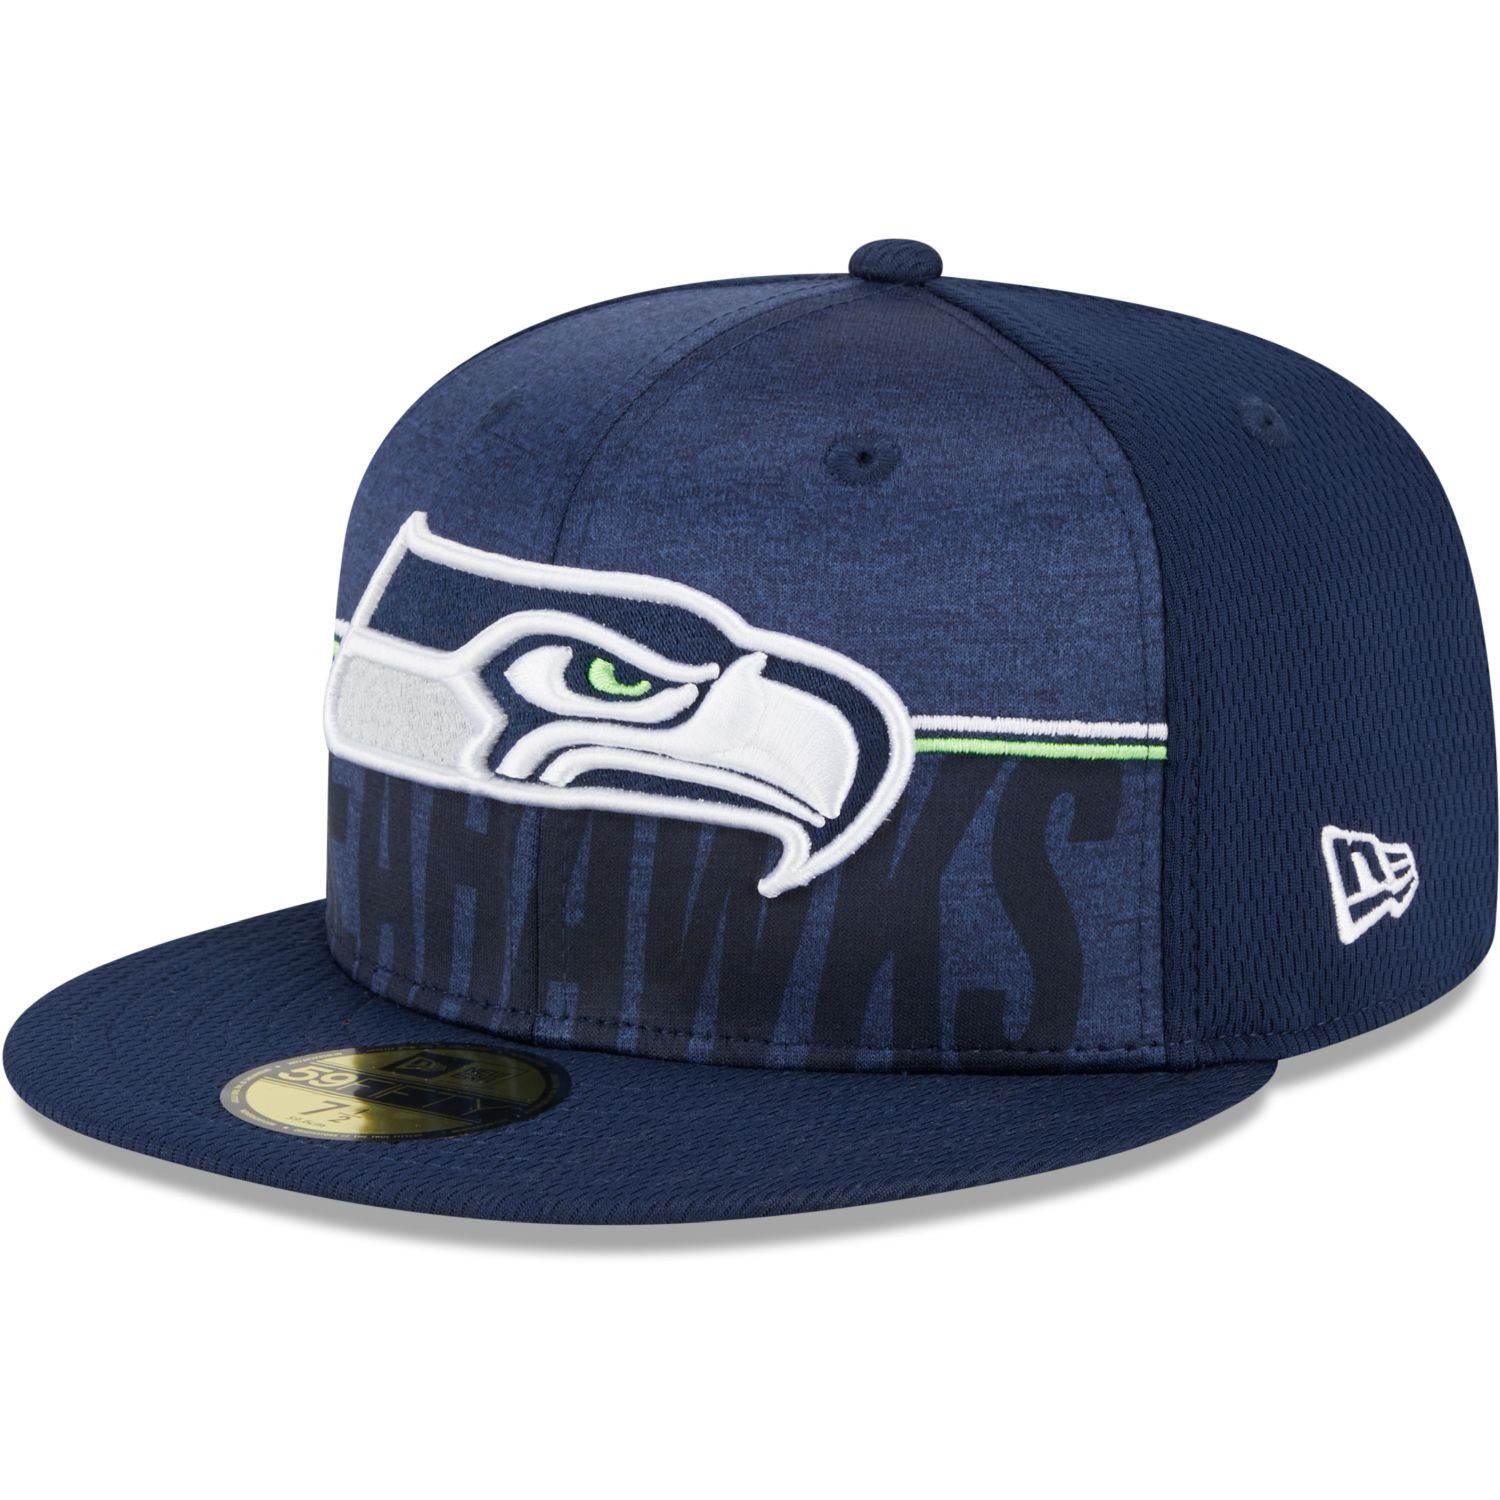 New Era Fitted Cap 59Fifty NFL TRAINING Seattle Seahawks